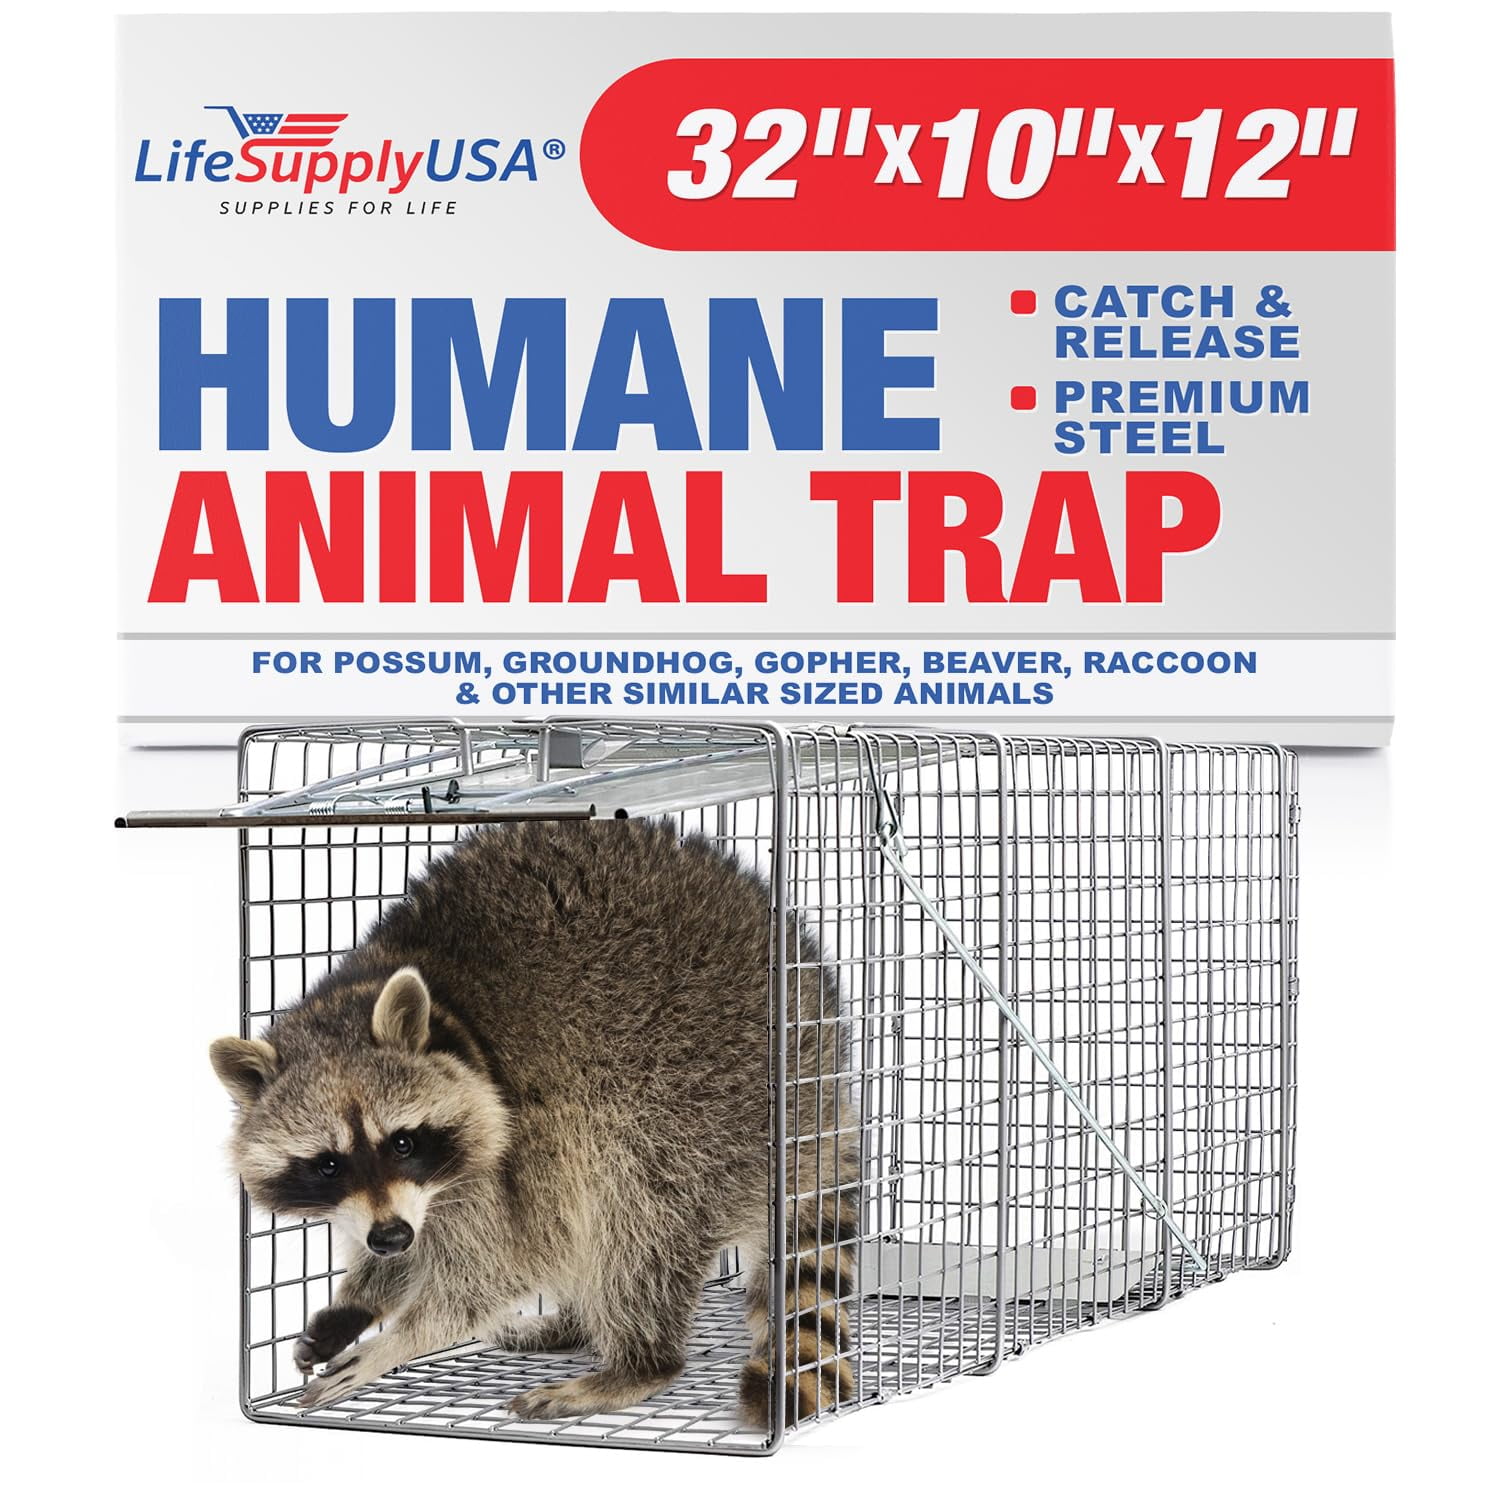 Drop in The Bucket 7766181 Small Multiple Catch Animal Trap for Mice, 1 -  Gerbes Super Markets